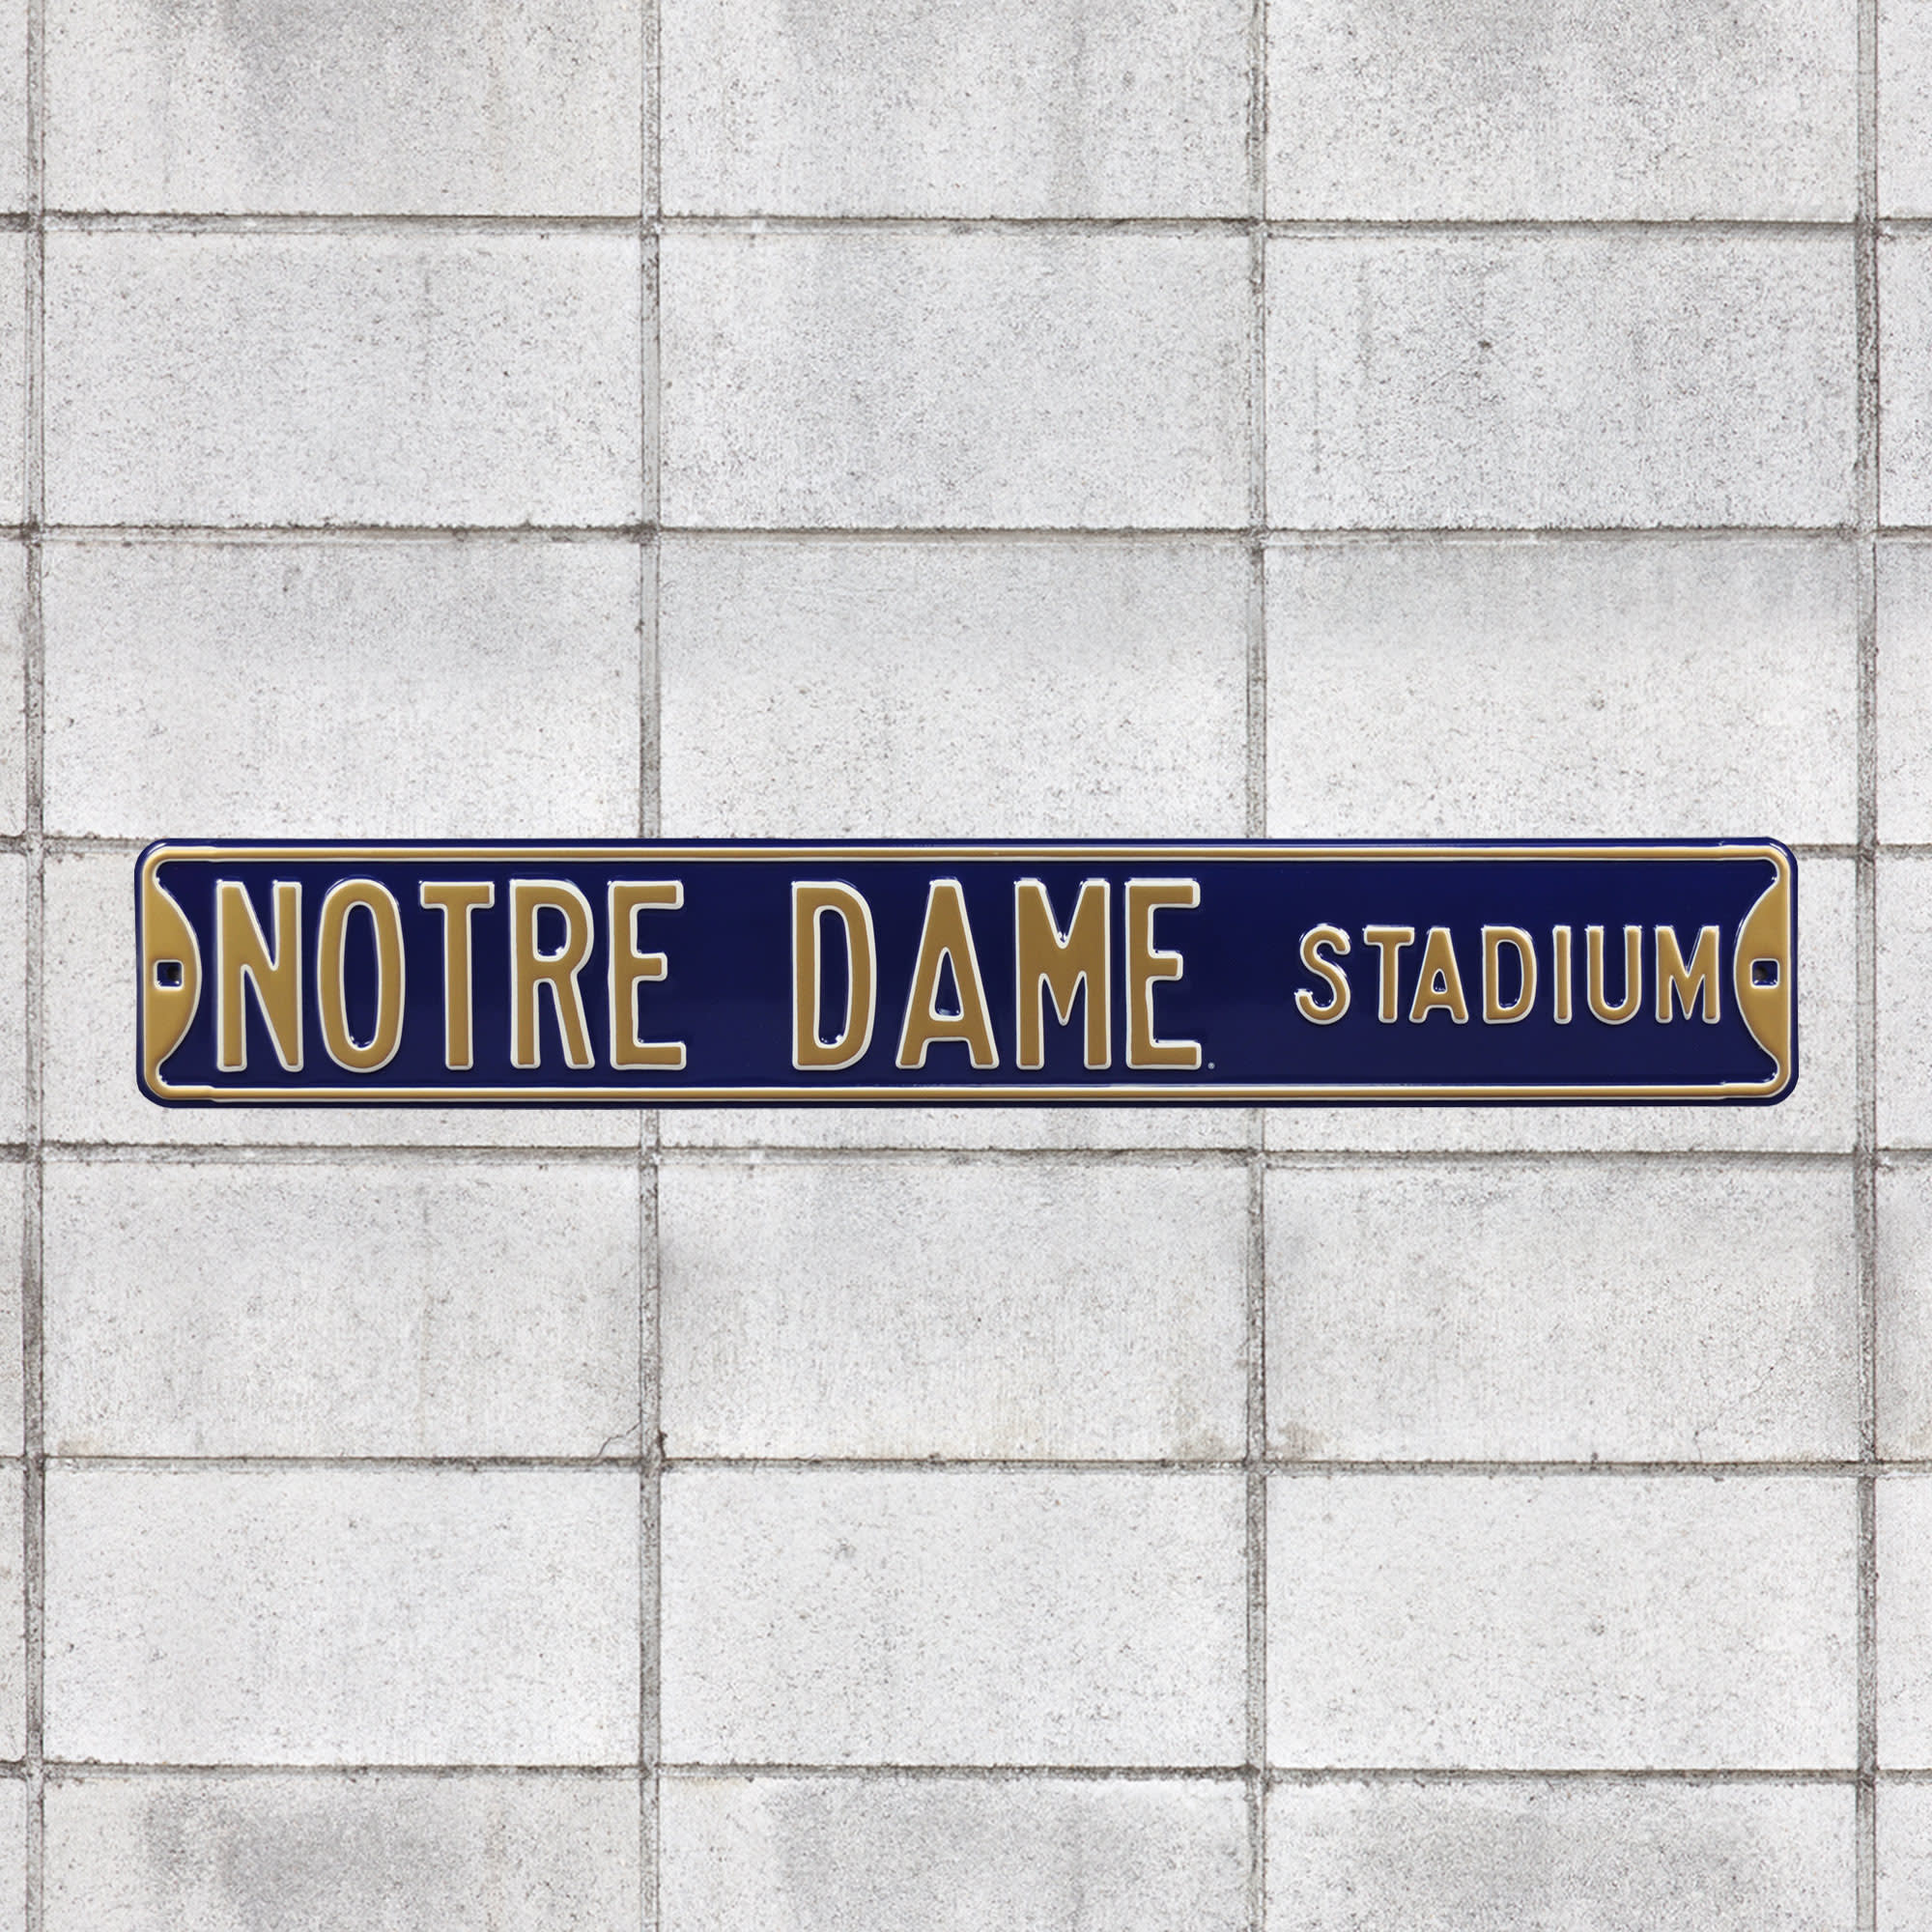 Notre Dame Fighting Irish: Notre Dame Stadium - Officially Licensed Metal Street Sign 36.0"W x 6.0"H by Fathead | 100% Steel